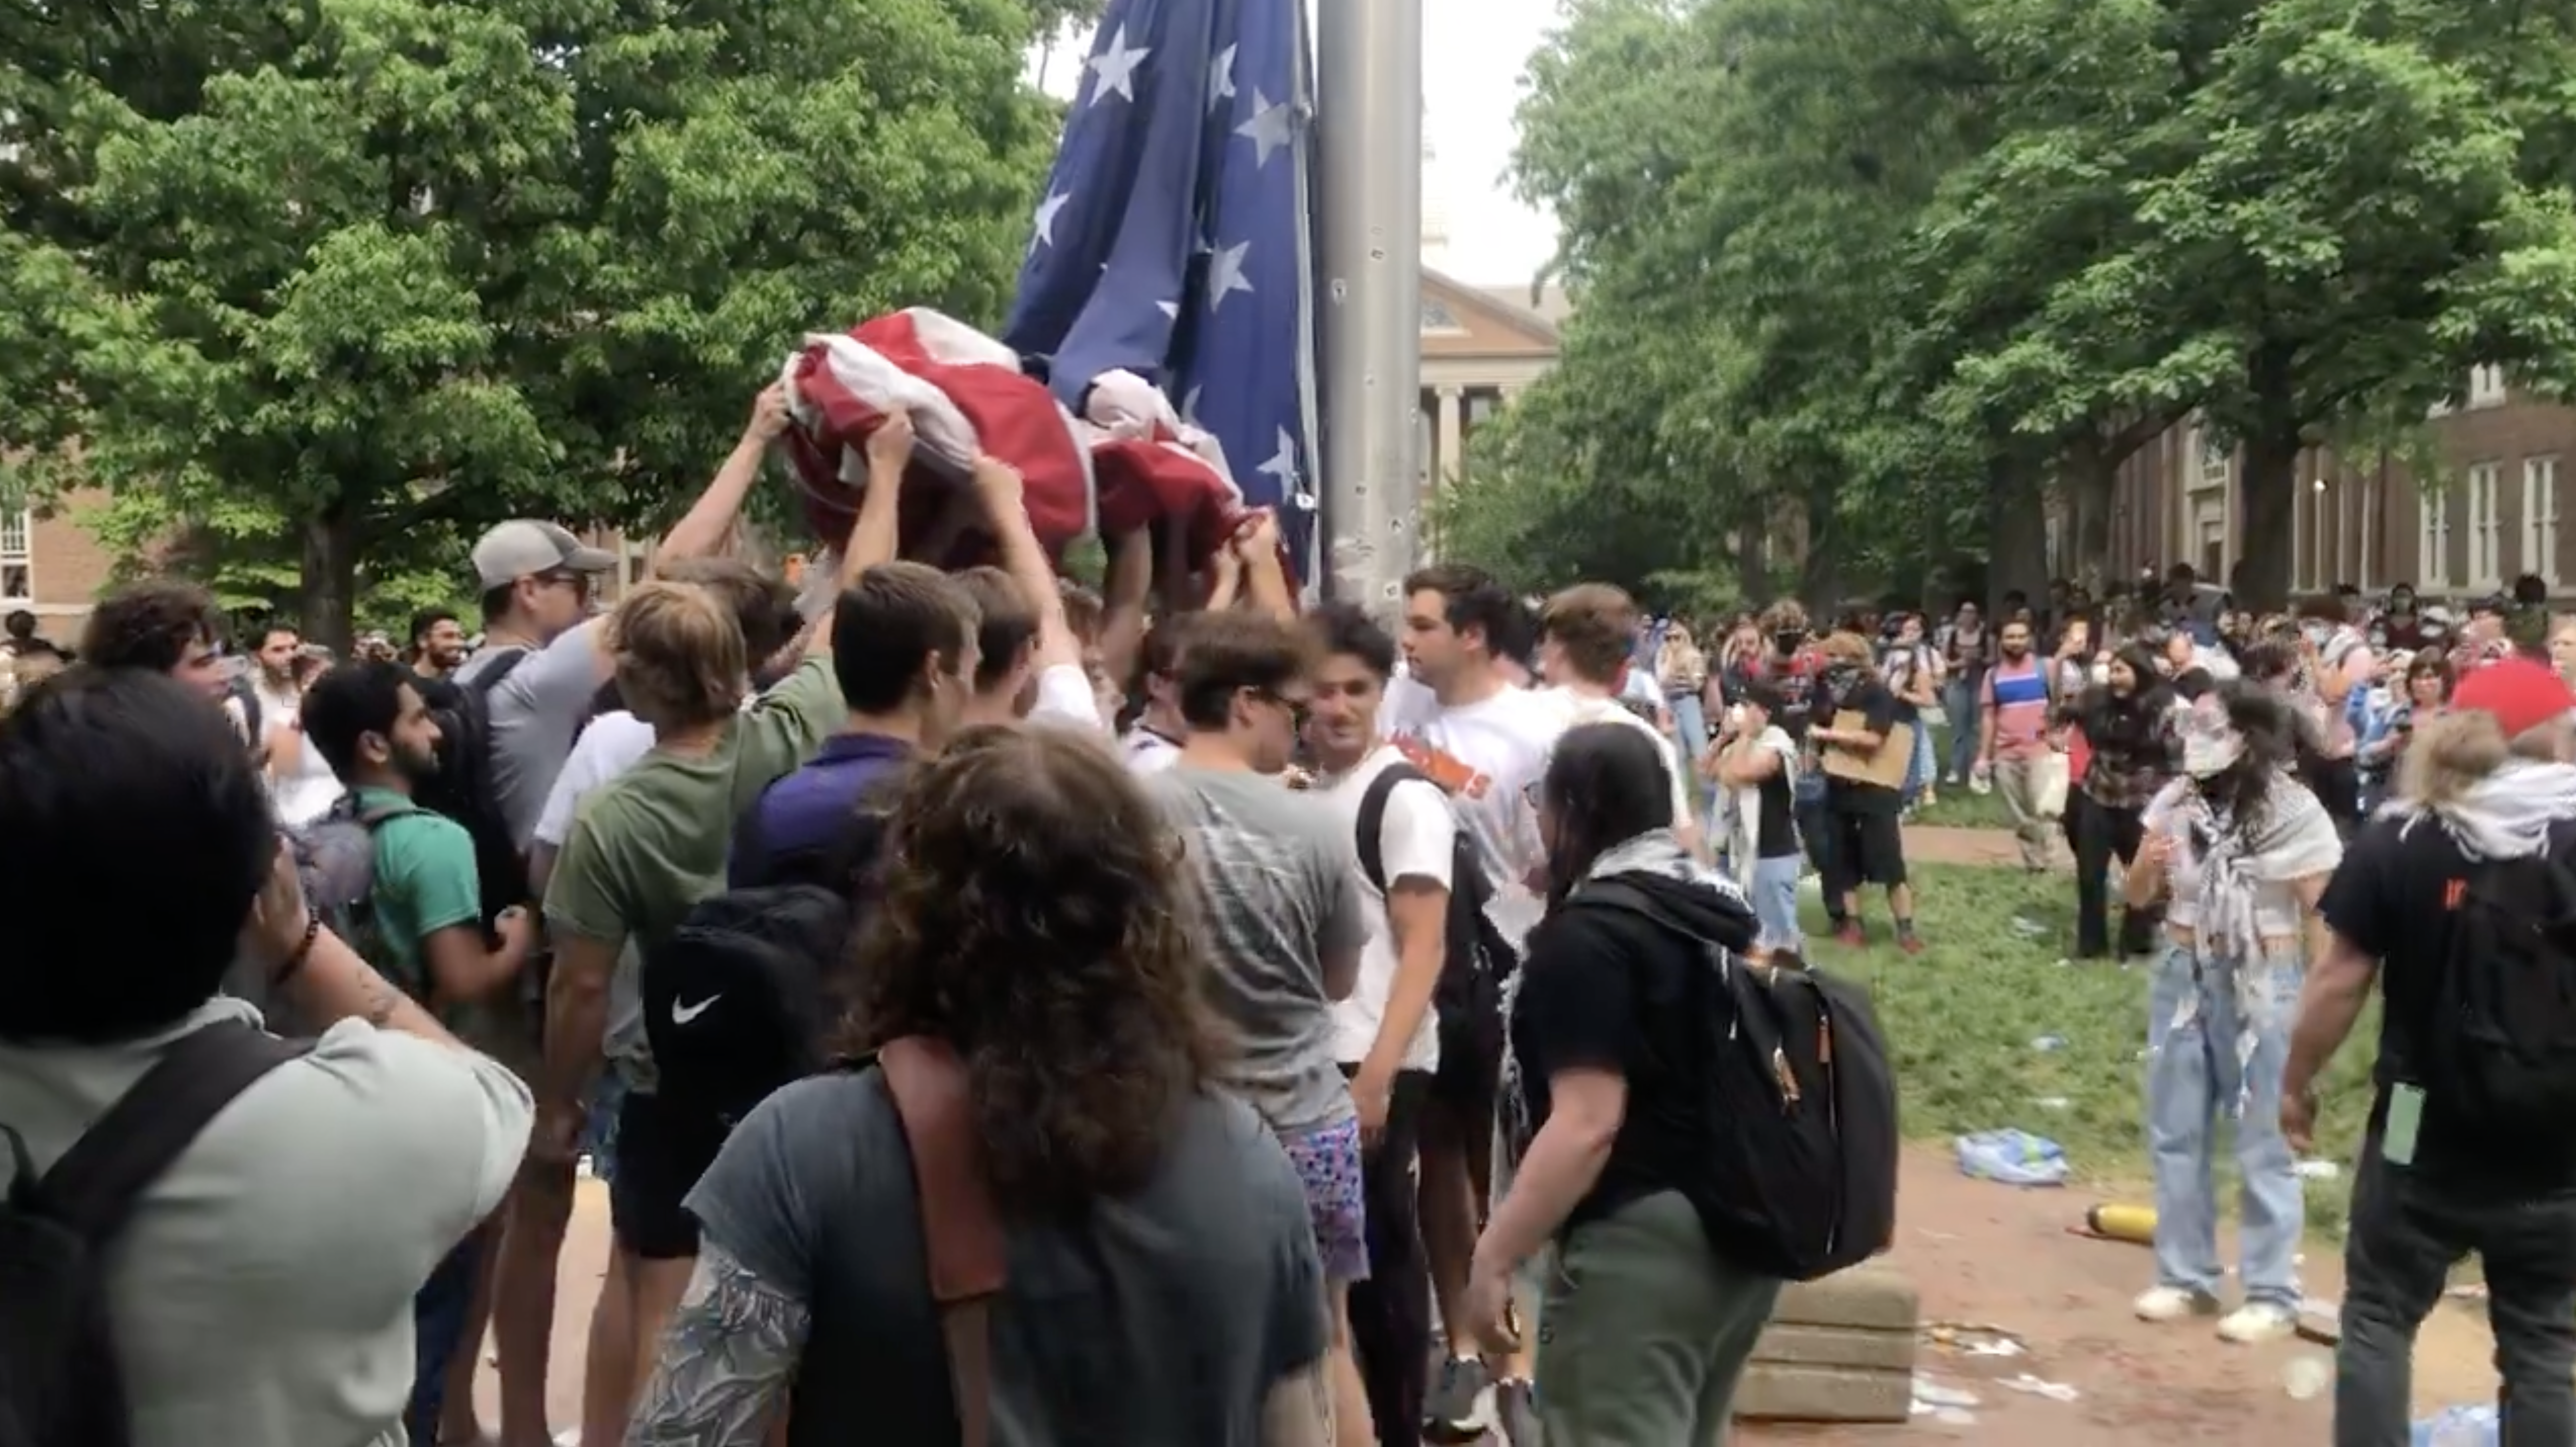 College Students Raise Over 0k on GoFundMe for Defending American Flag from Pro-Hamas Protesters